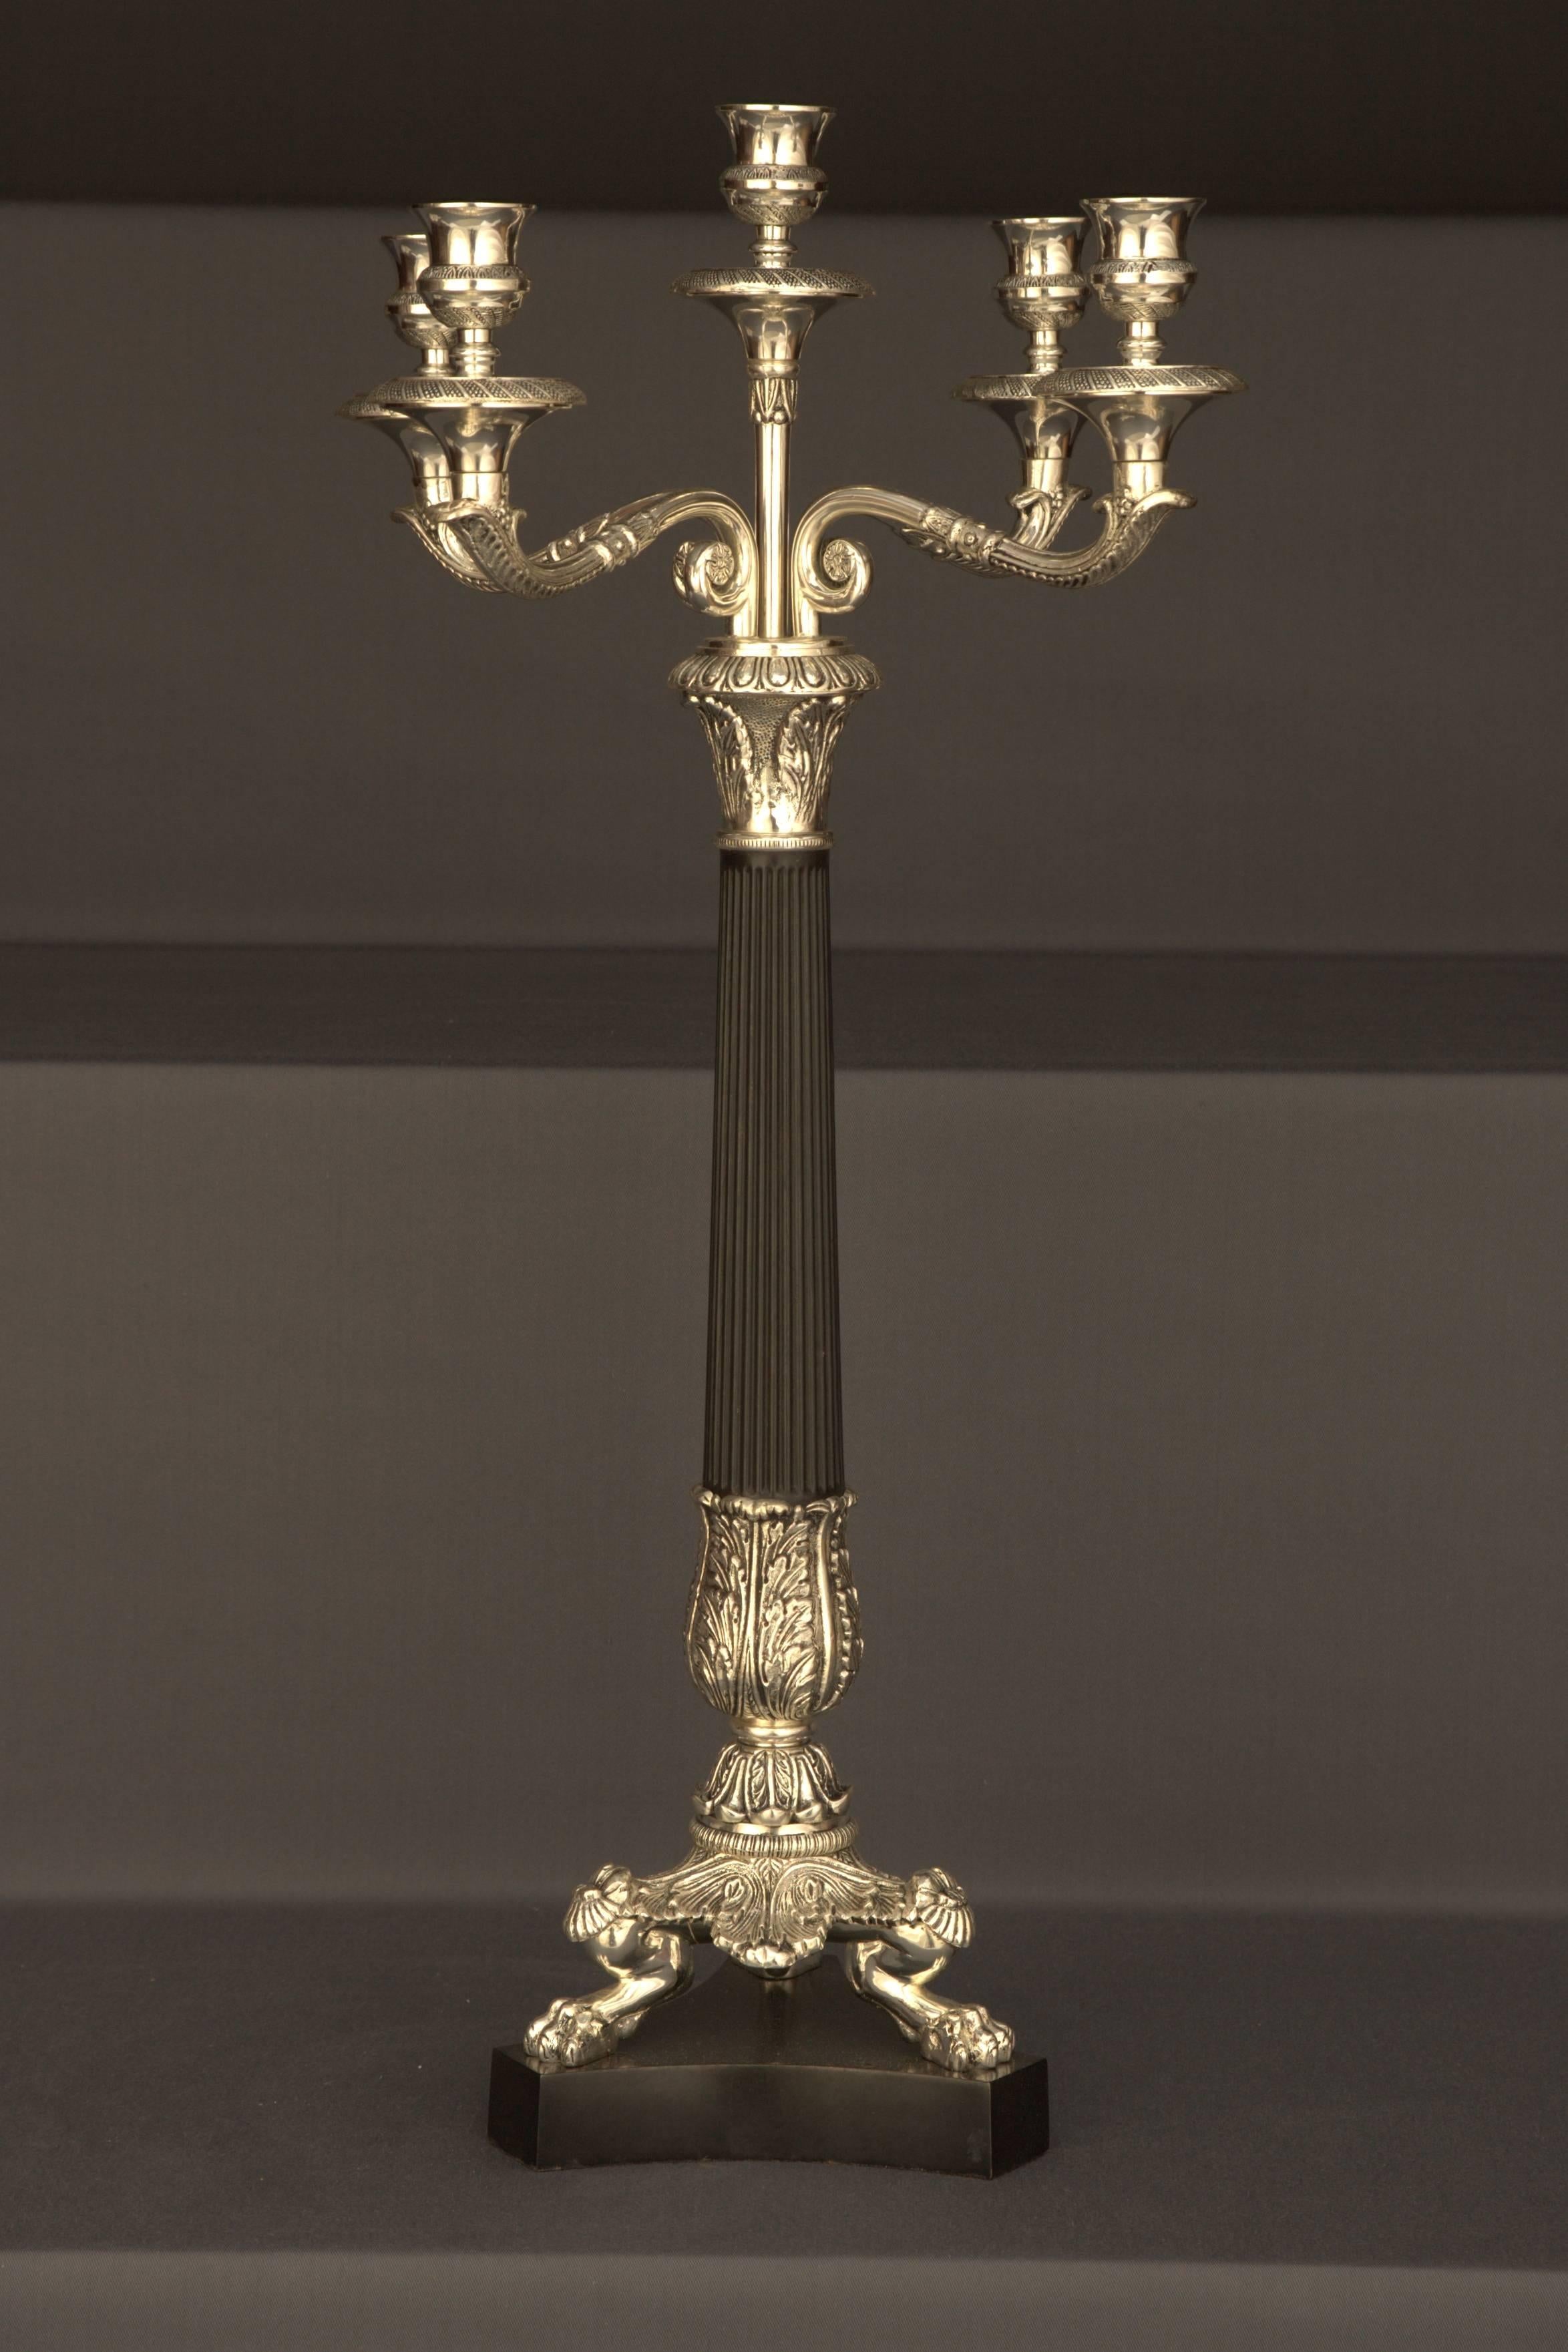 Bronze, finely engraved and silvered. Chanelled columns with
black patination, as holder for four sweeping candelabra arms.
Measures: 
Diameter 33cm, 
height 62cm.